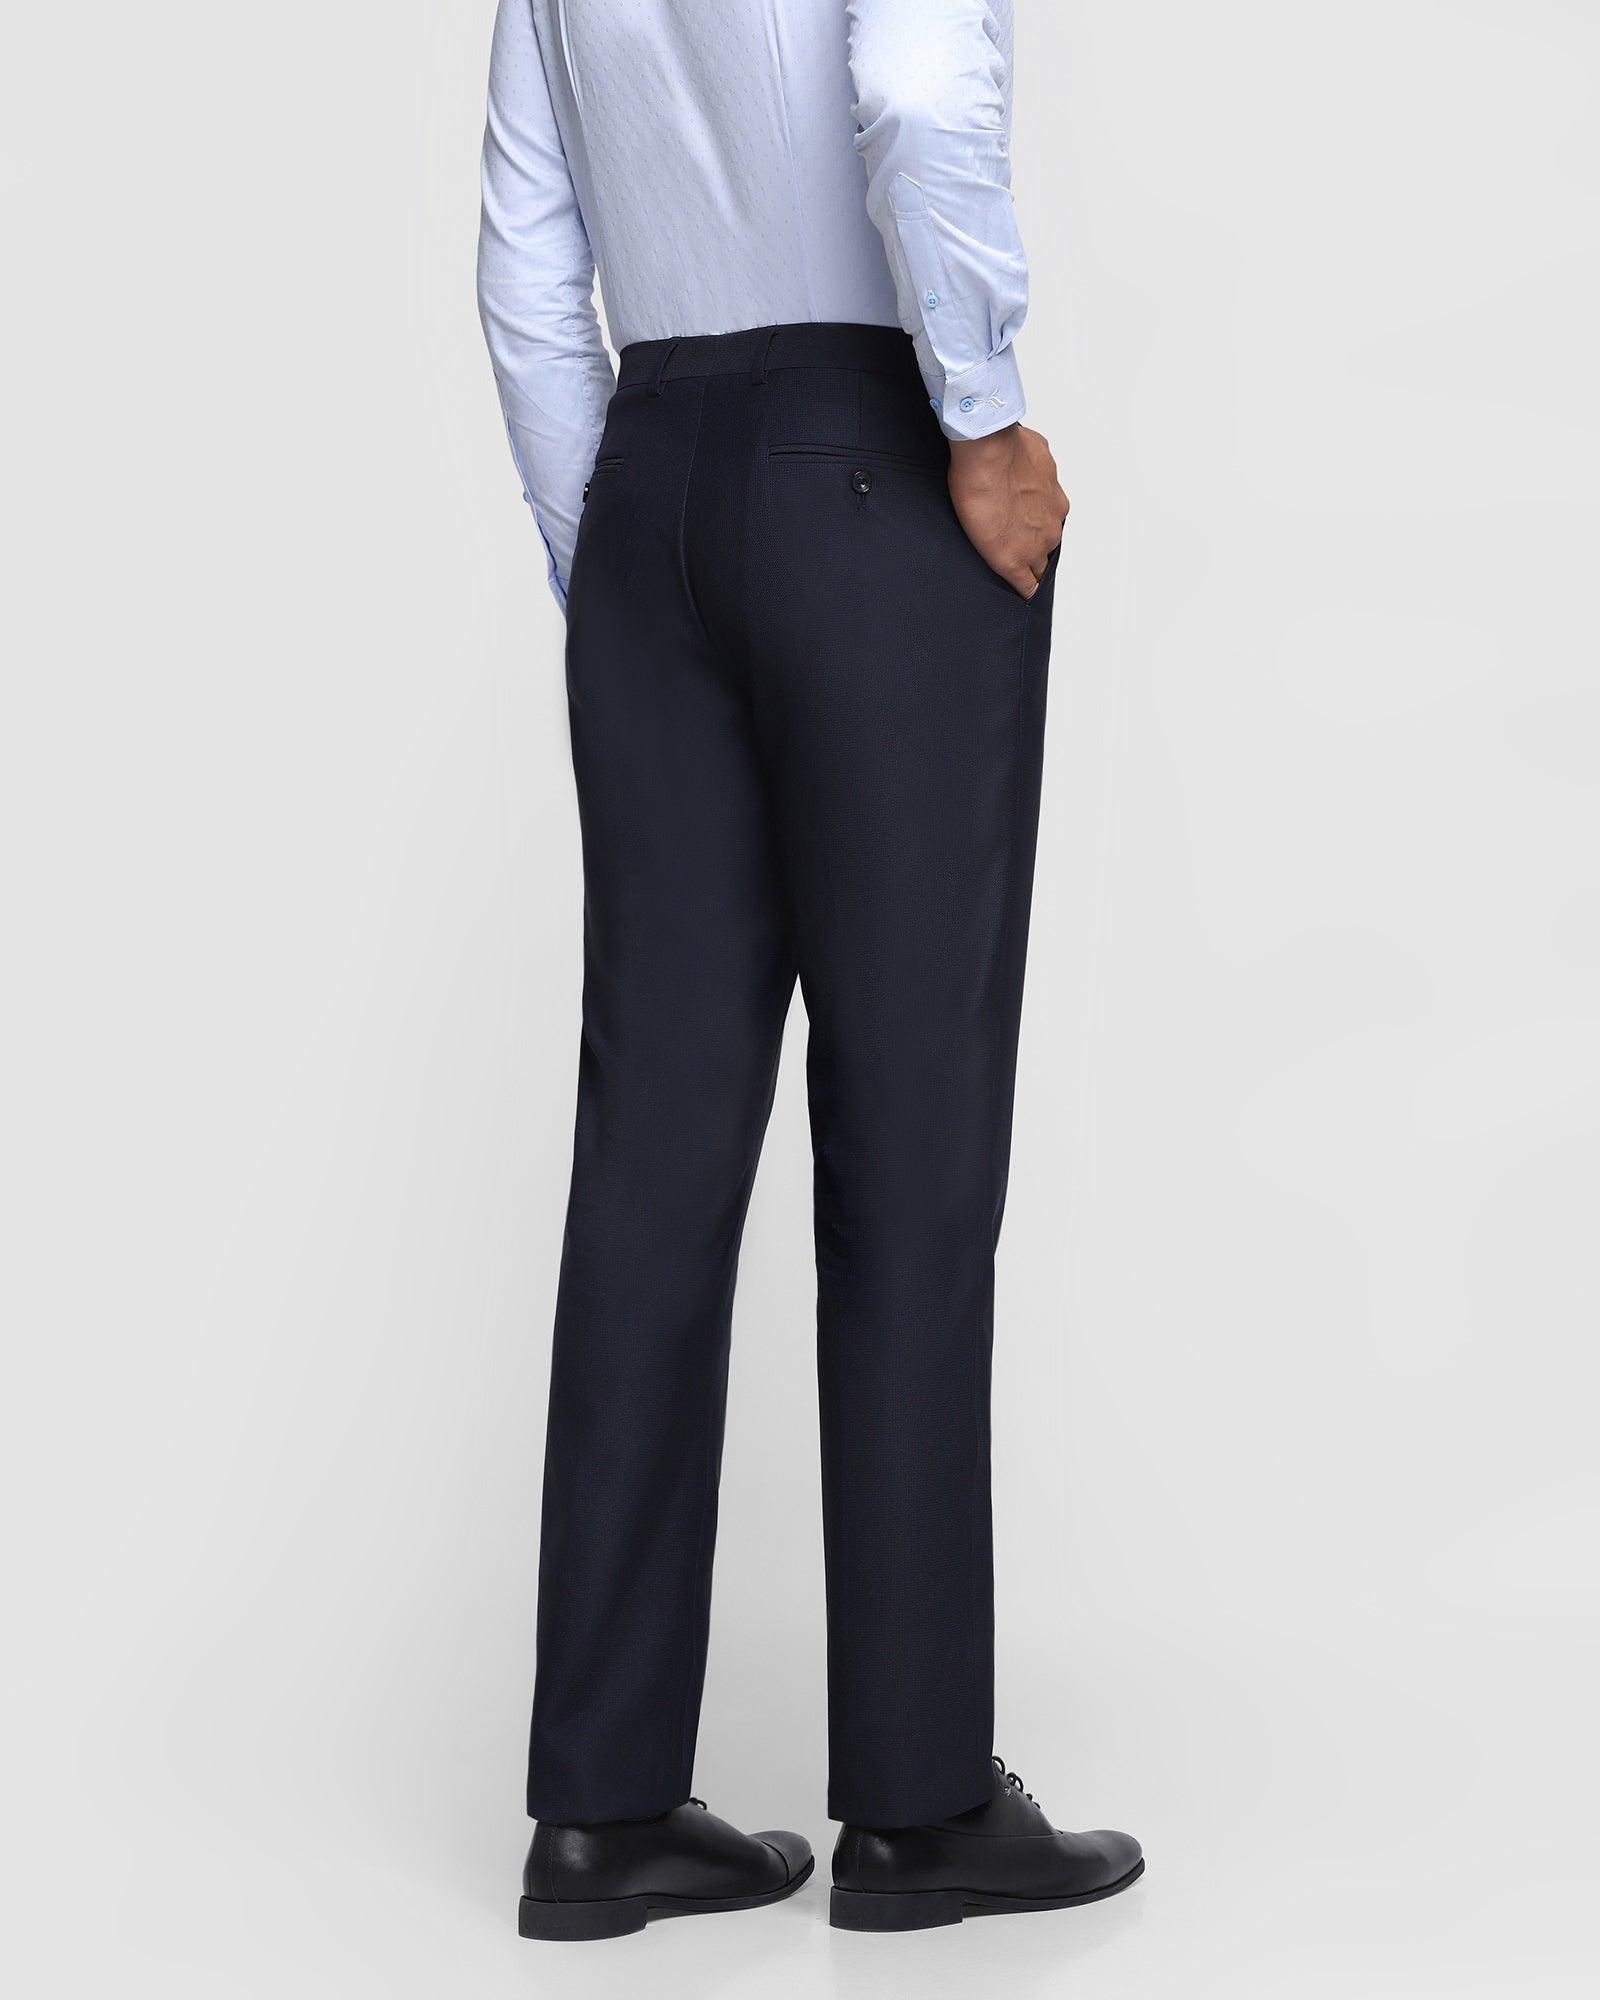 Buy FITHUB Women's Cotton Blend Solid Formal Trousers Color(Navy Blue) at  Amazon.in